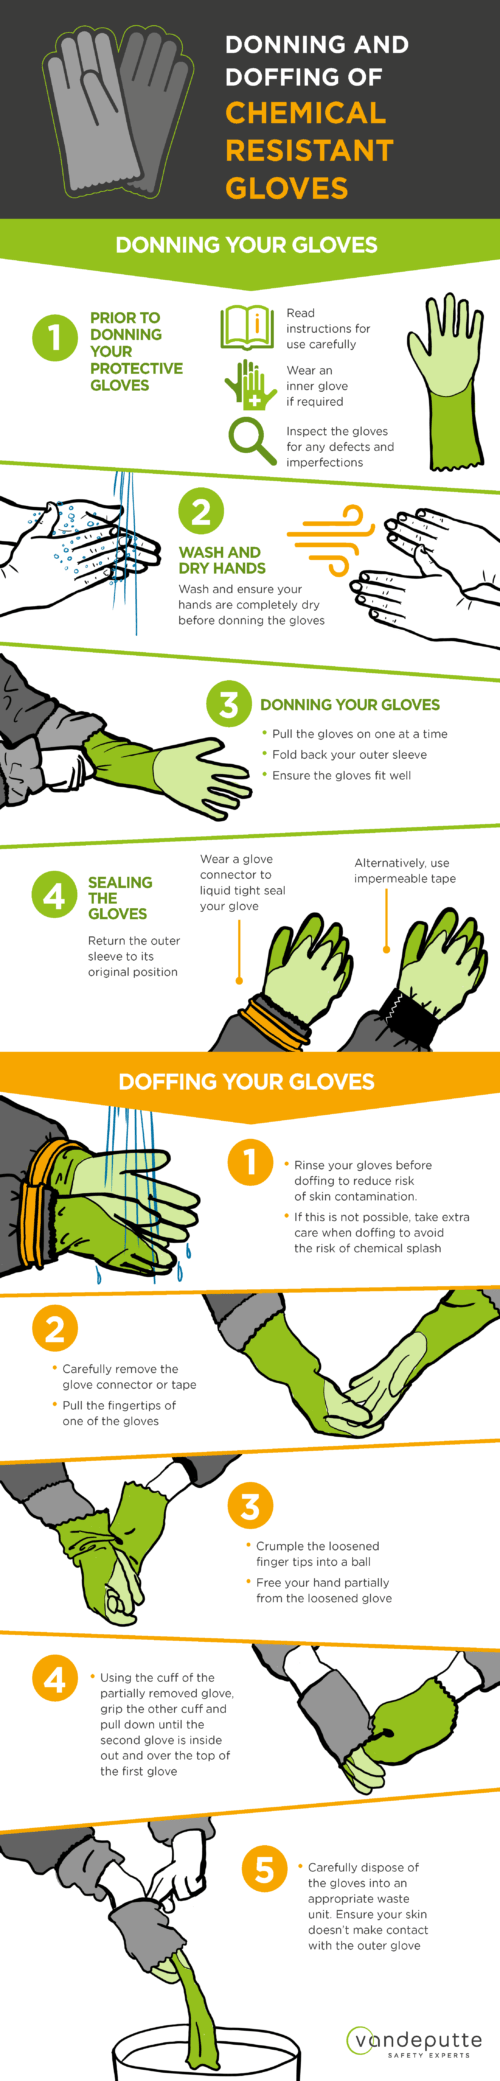 infographic donning doffing chemical gloves